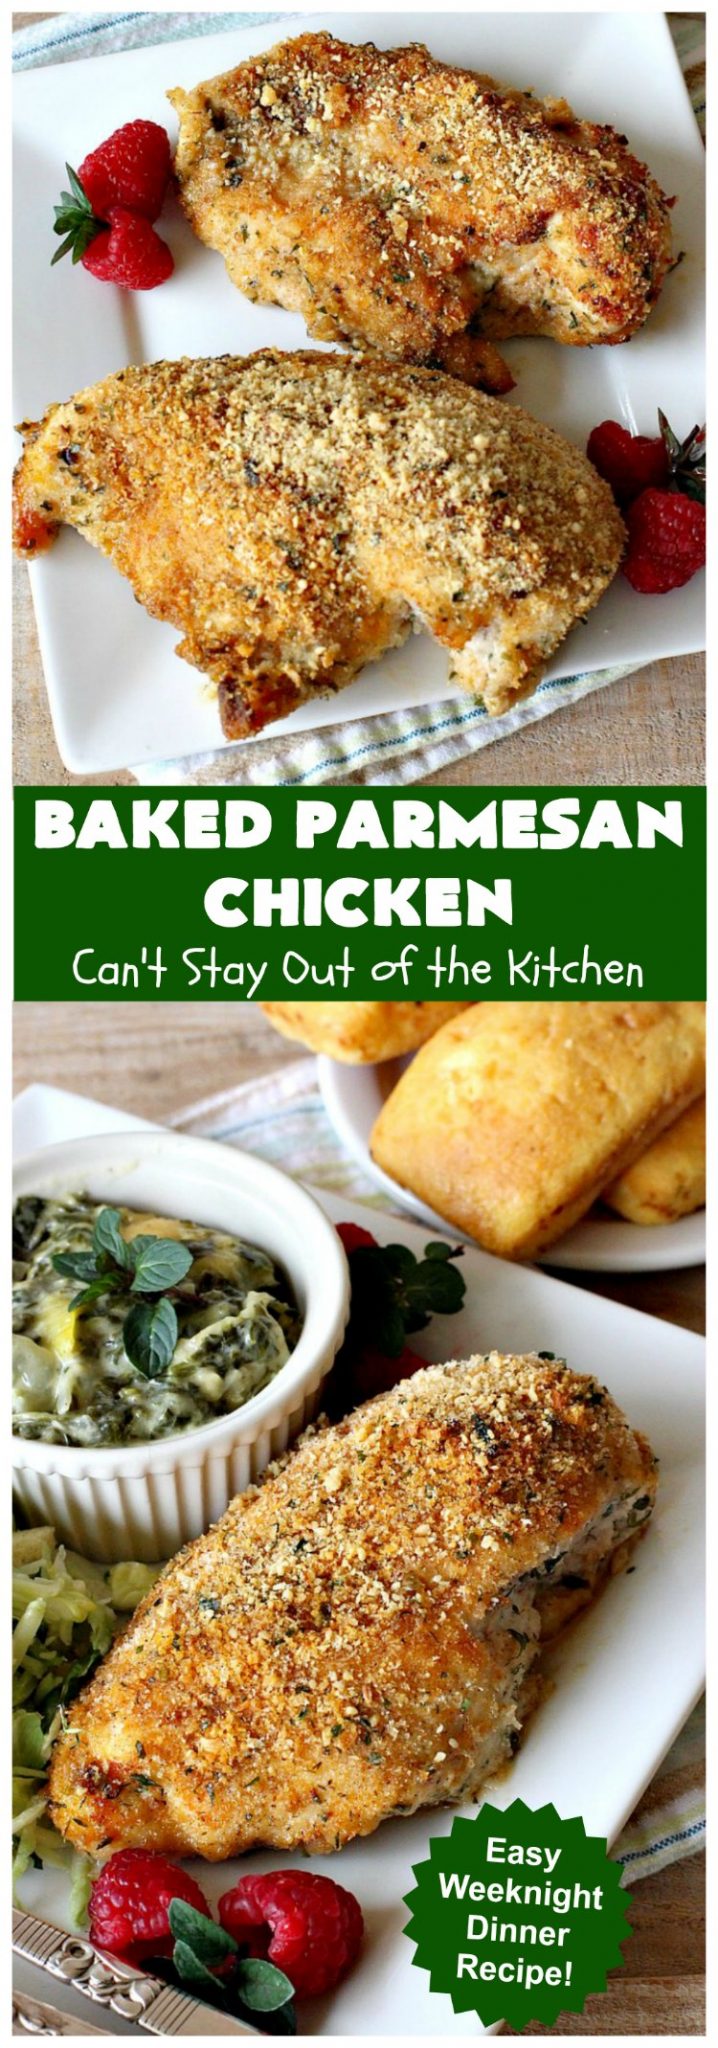 Baked Parmesan Chicken – Can't Stay Out of the Kitchen